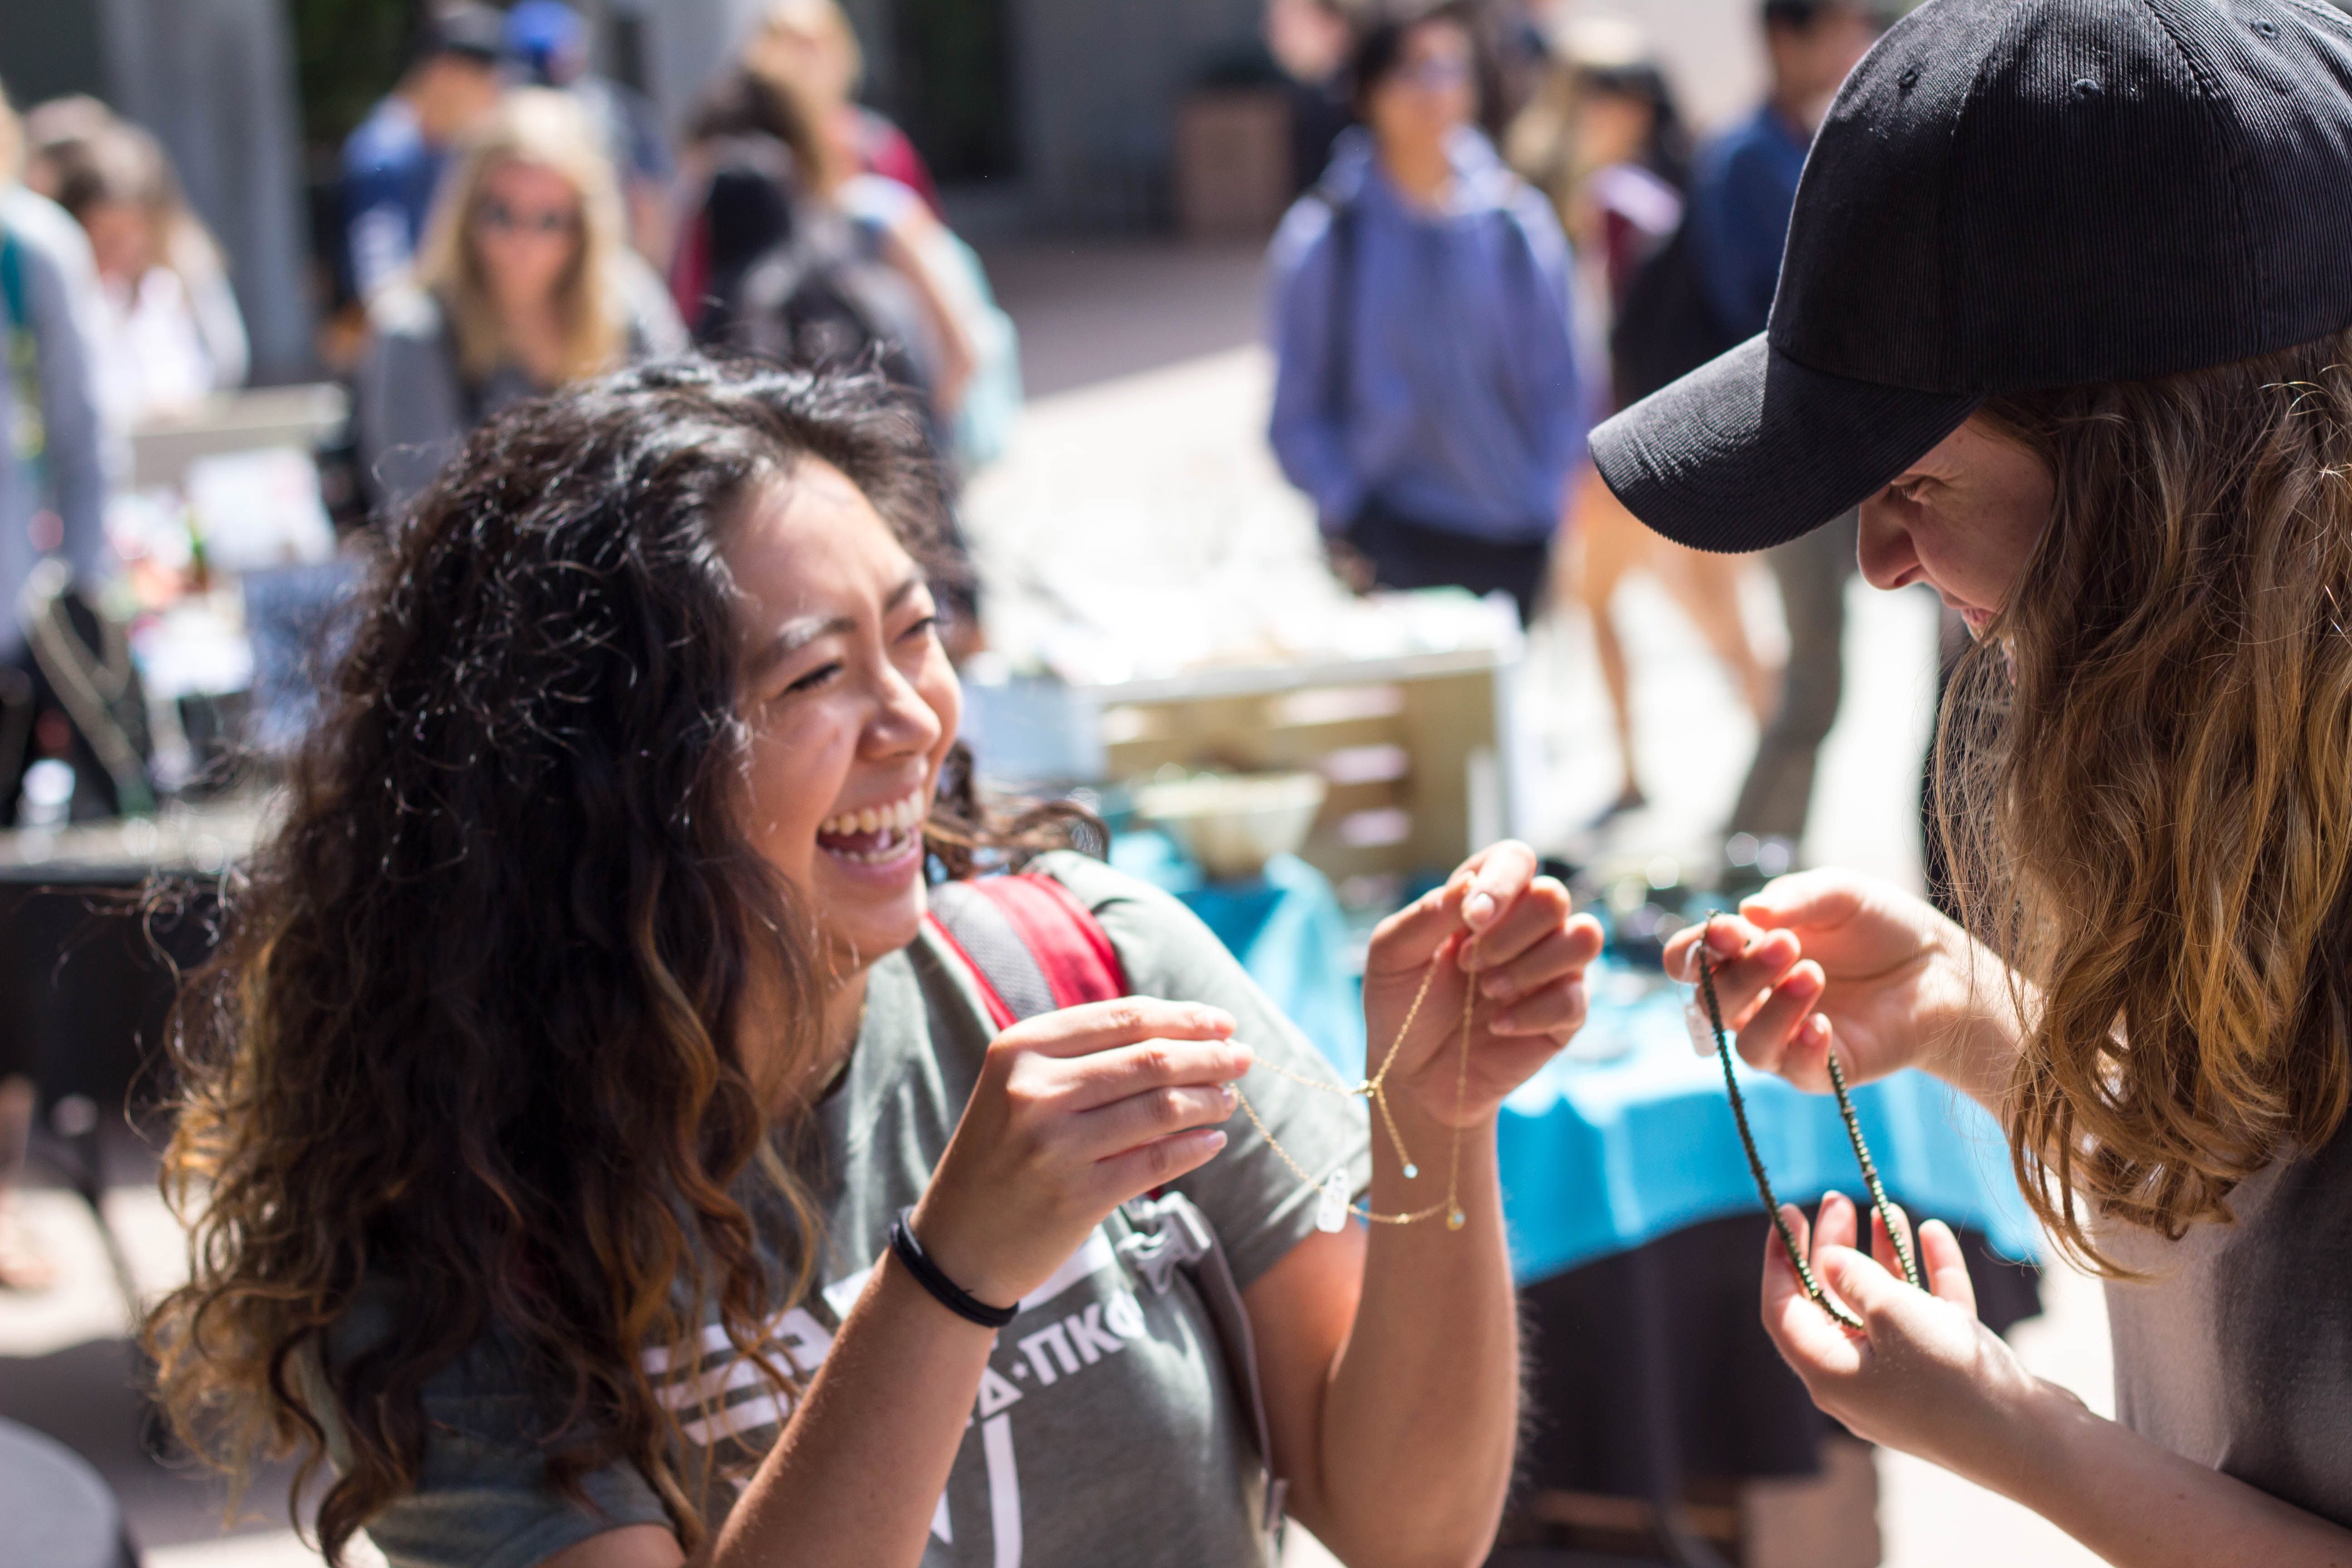 Two female students smile while holding up necklaces at the Craft Sale